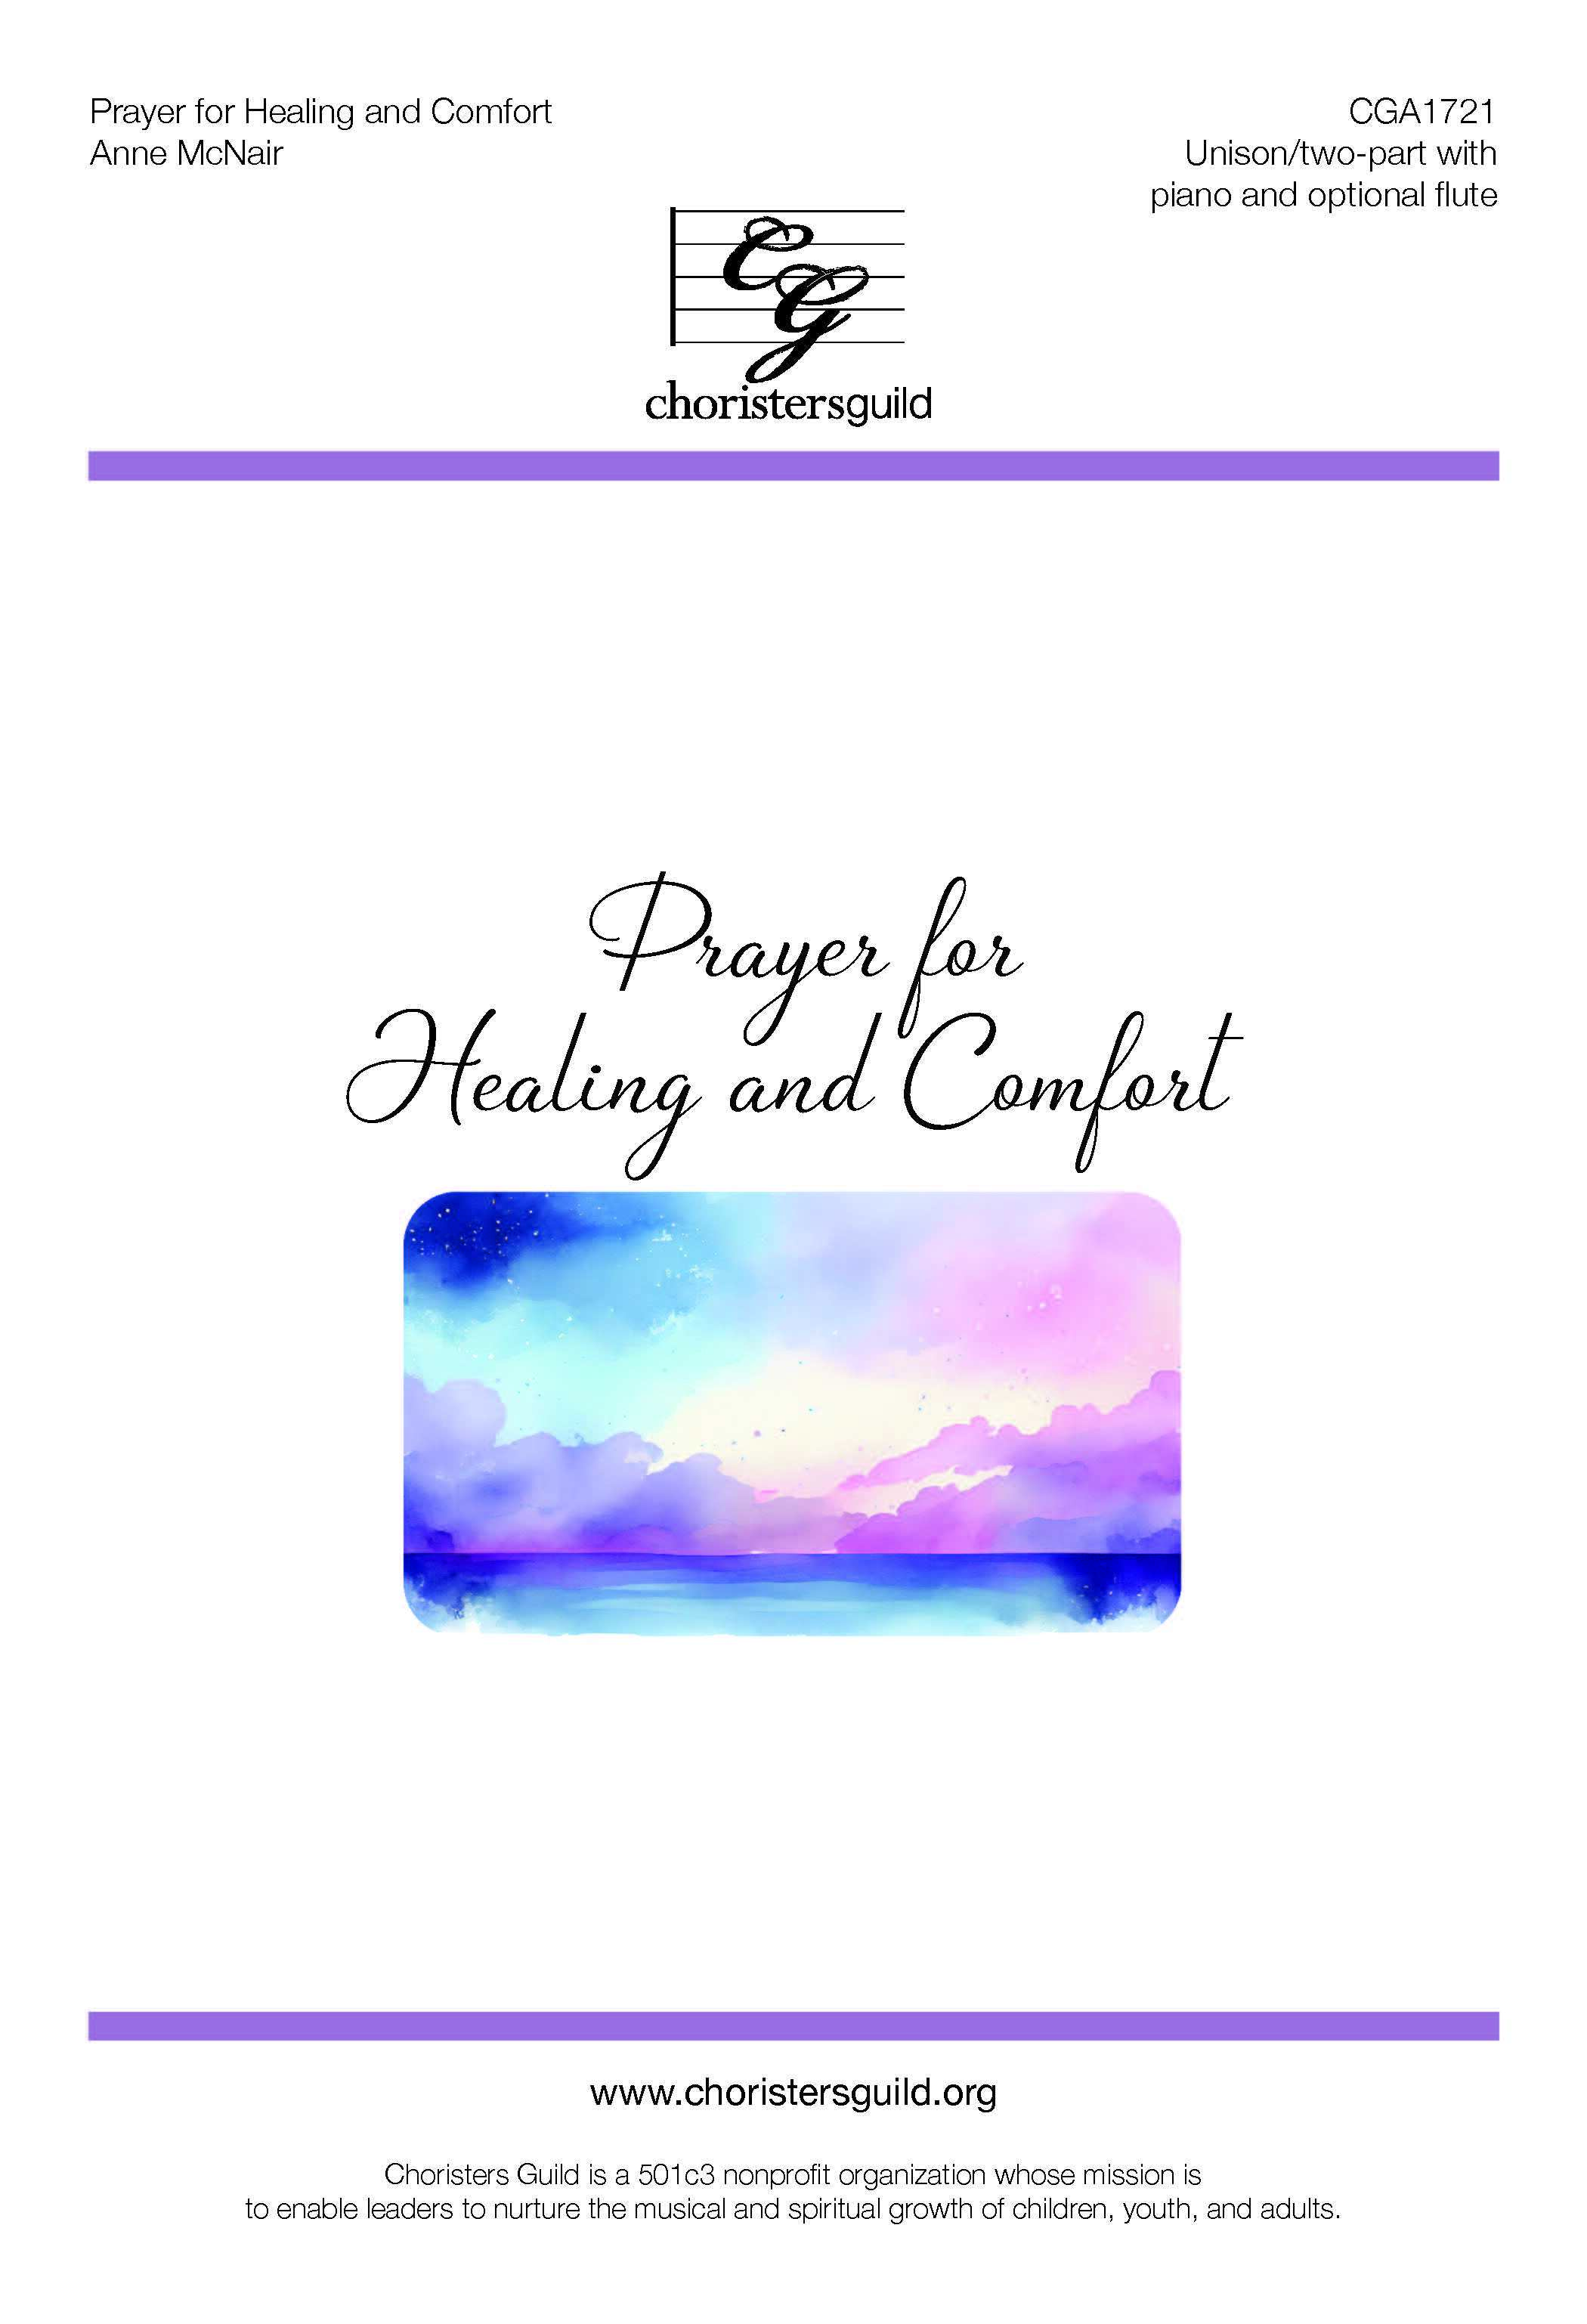 Prayer for Healing and Comfort - Unison/Two-part